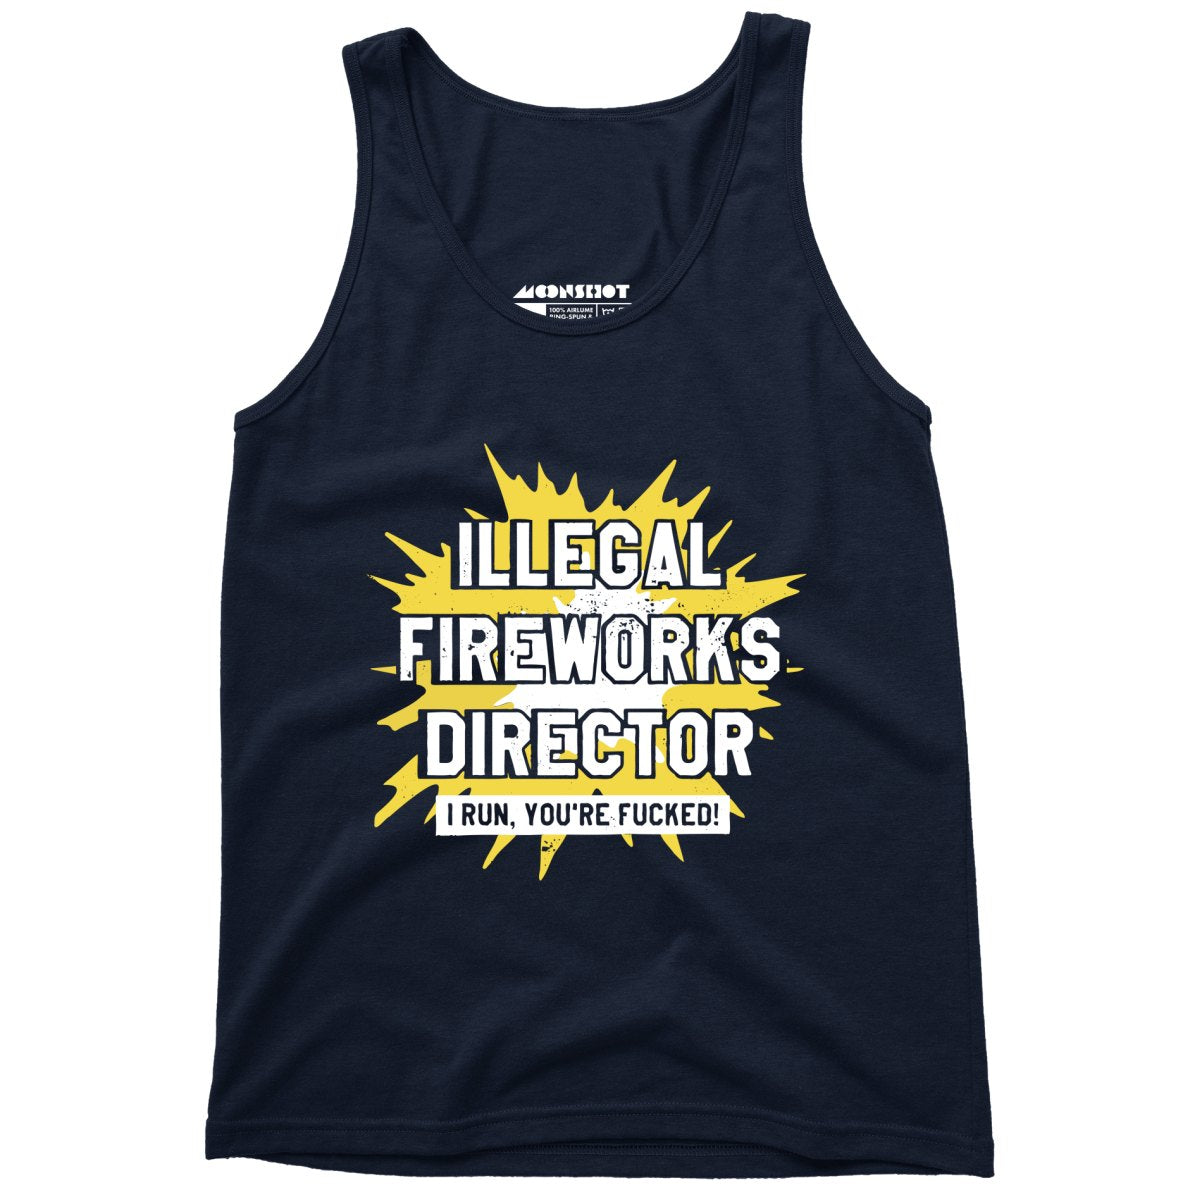 Illegal Fireworks Director I Run, You're Fucked - Unisex Tank Top